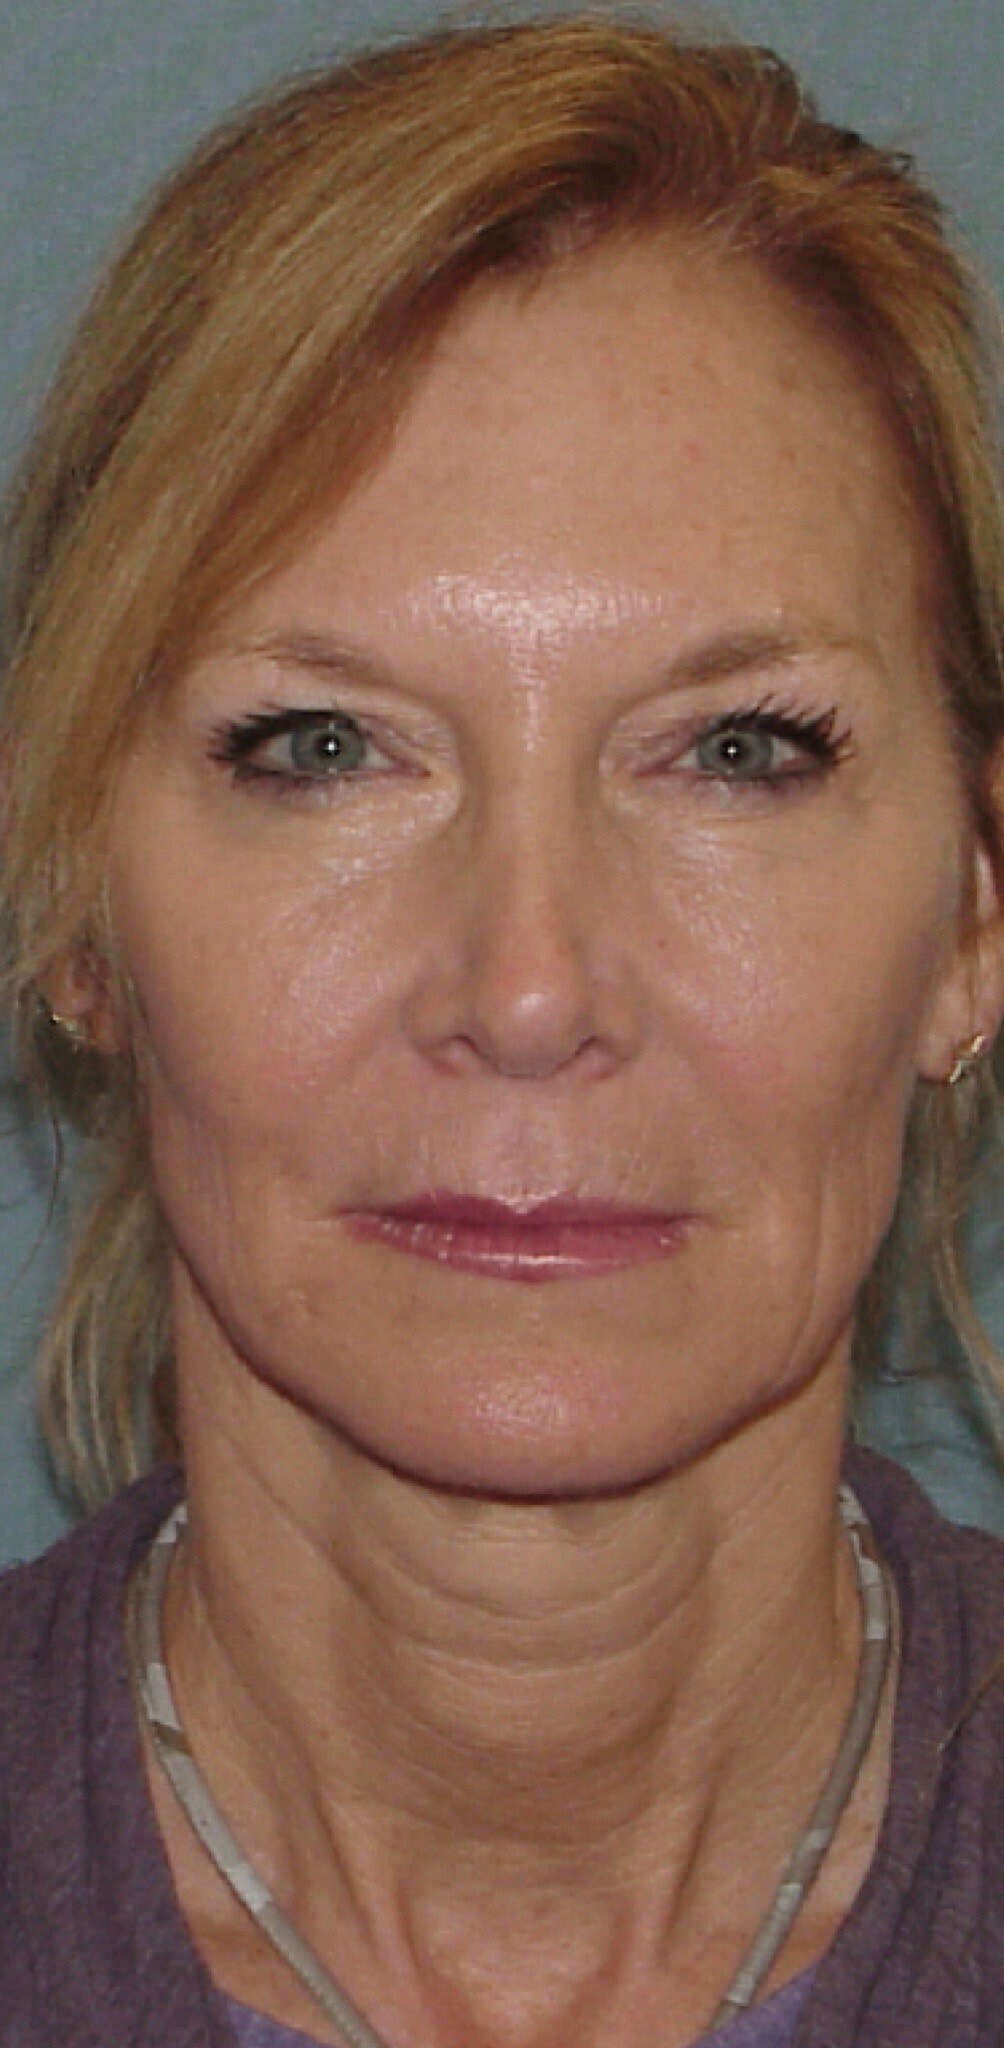 Photo of the patient’s face before the Facelift surgery. Set 1. Patient 1